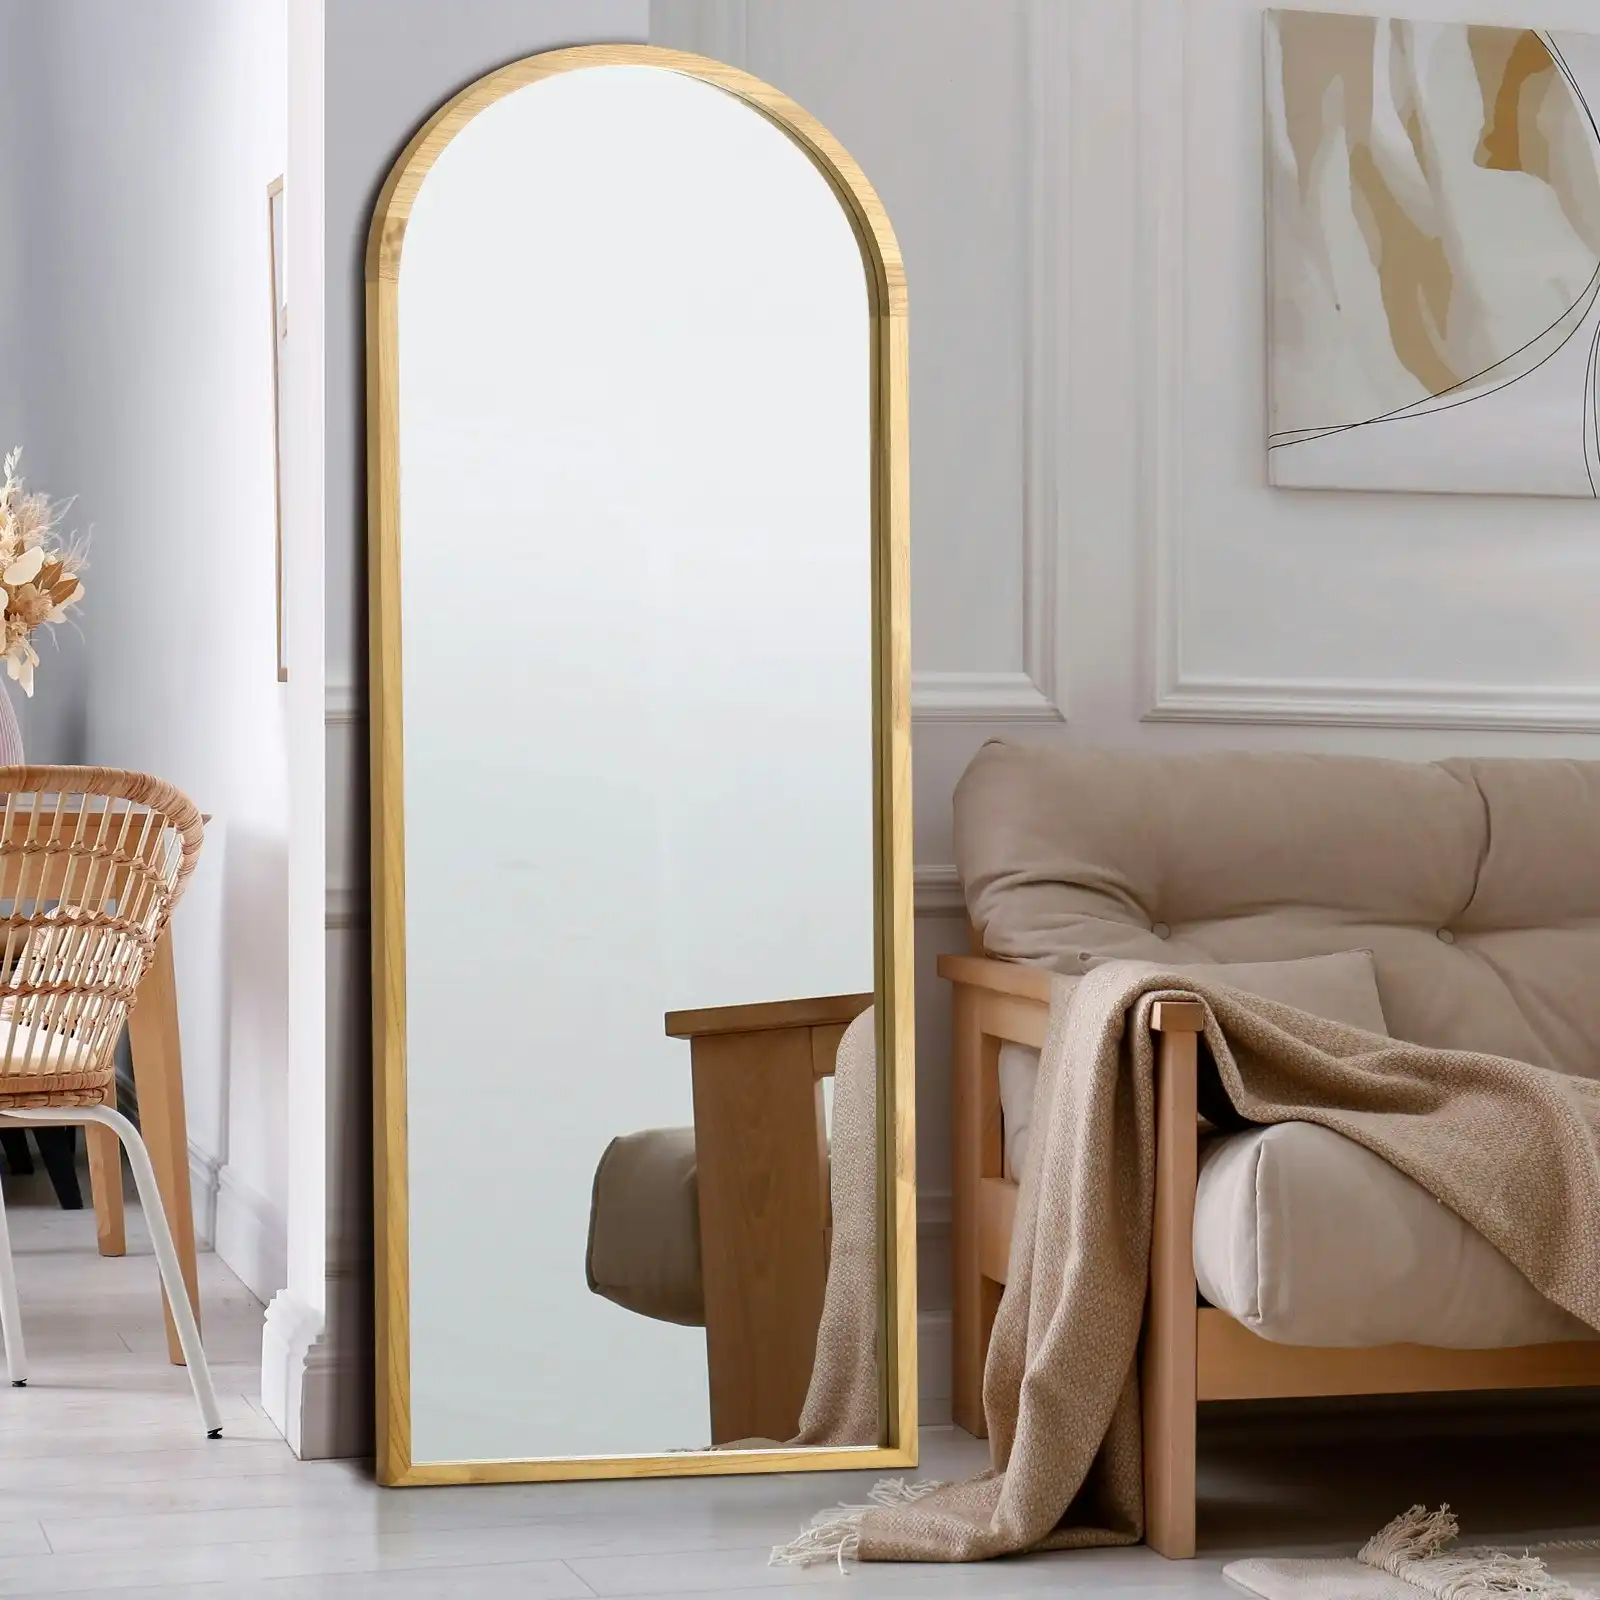 Oikiture 166x60cm Full Length Mirror Arched Dressing Floor Mirrors Wooden